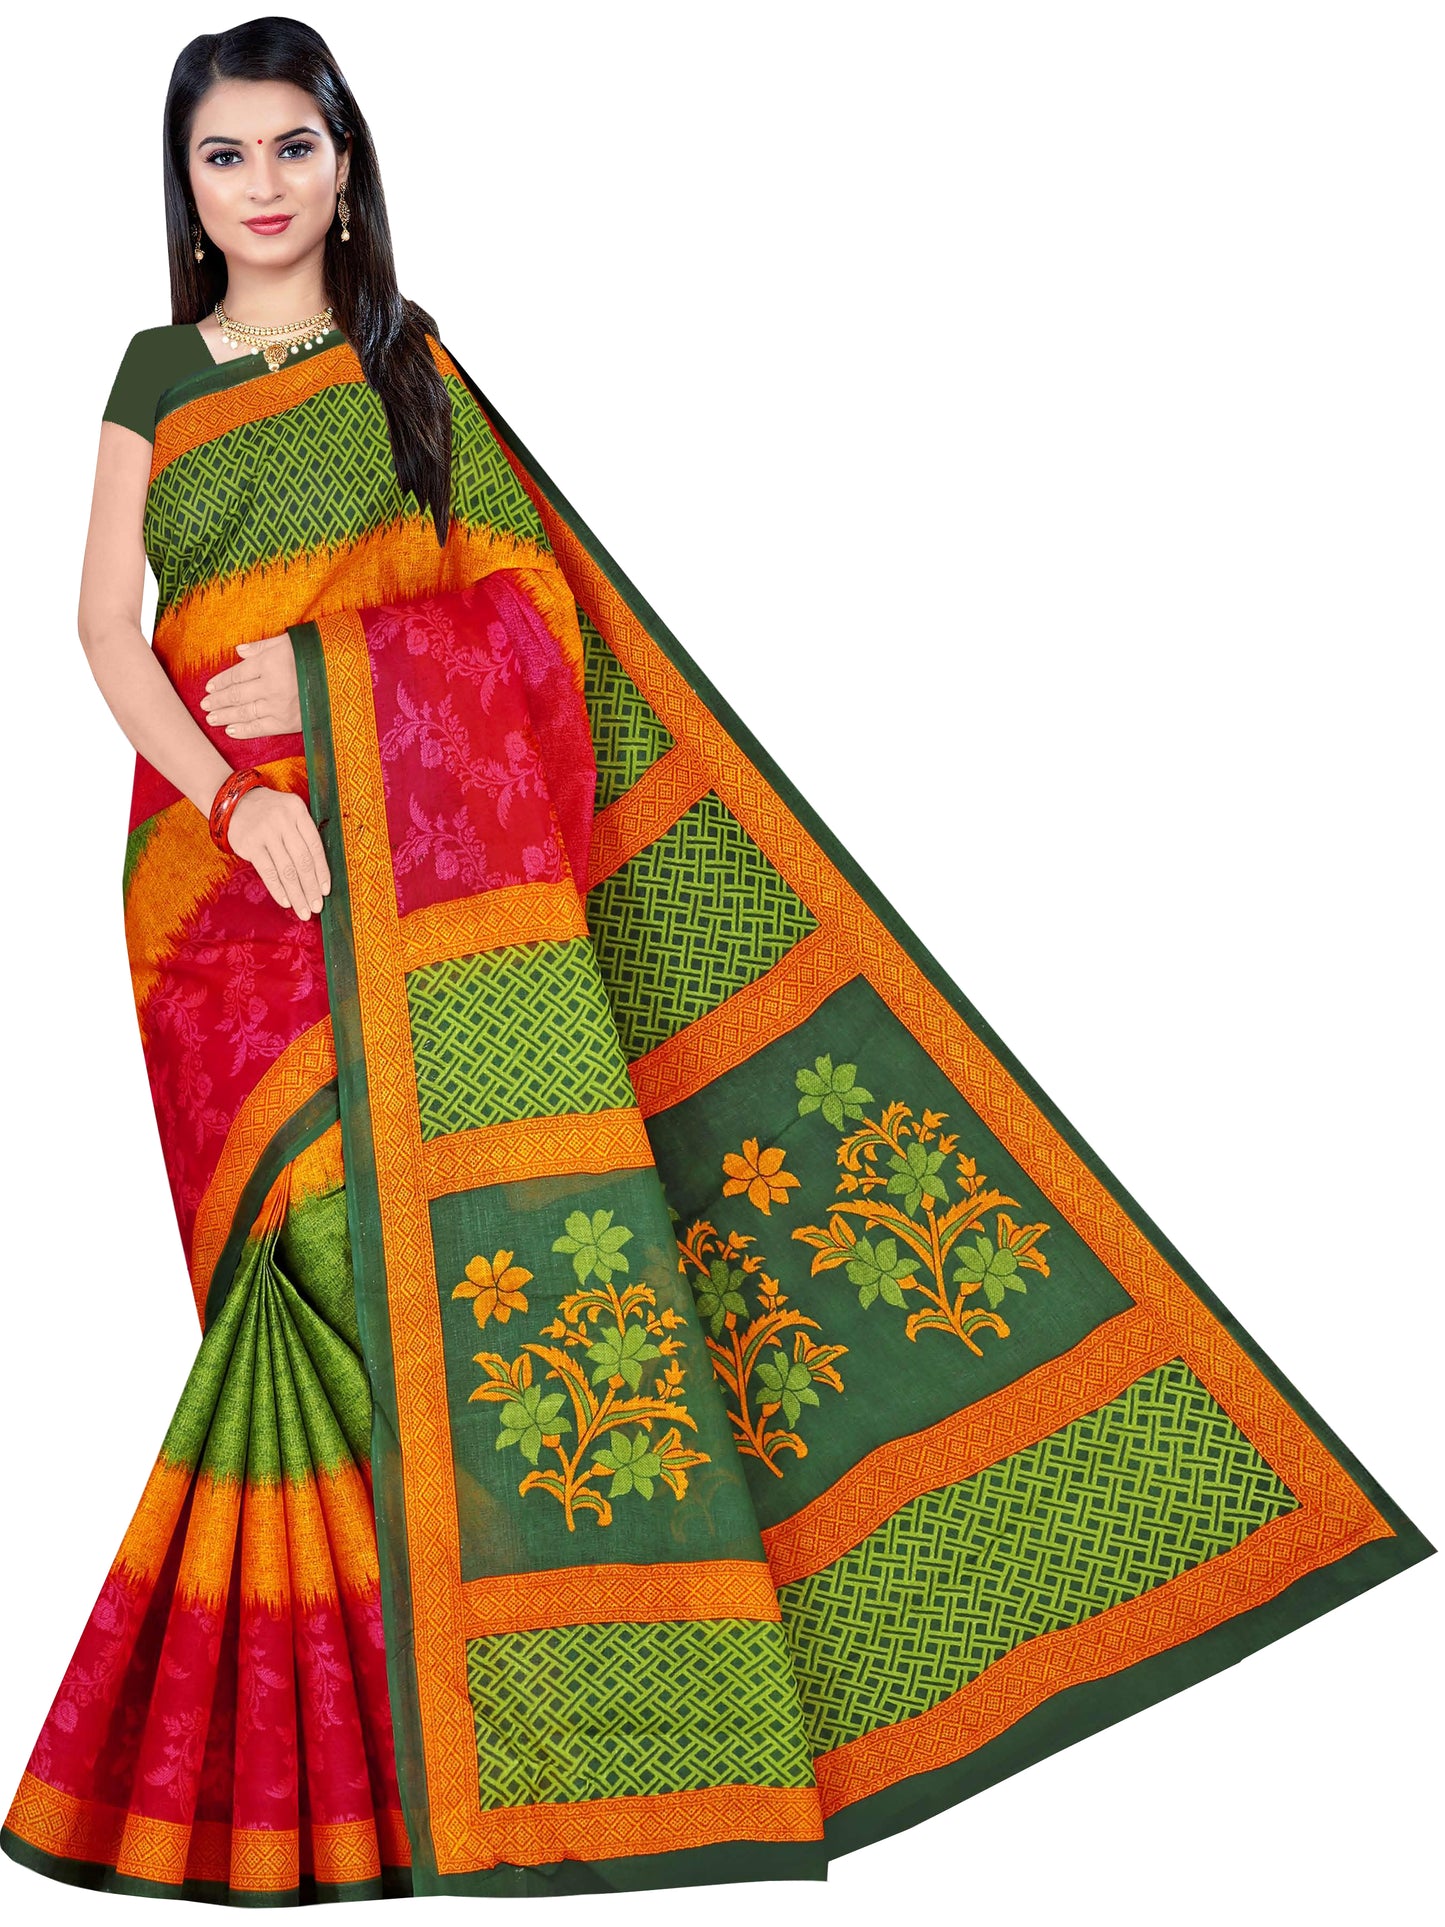 Pure Cotton Saree for Women, Casual Wear (Item Code: XYZCCSKR14)